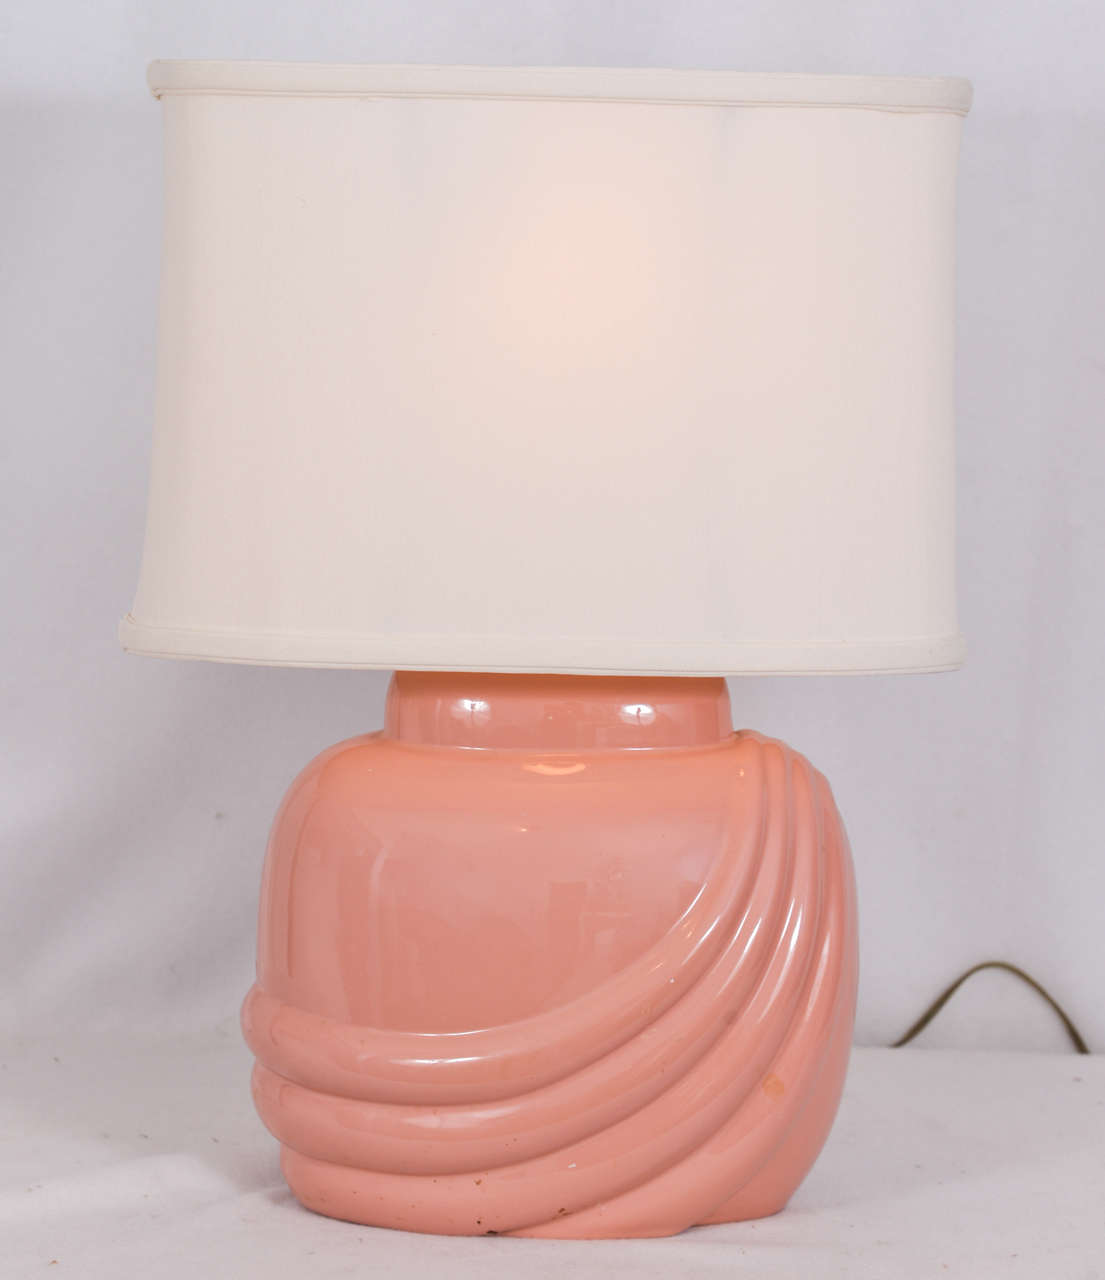 Romantic Mid-Century Modern table lamps, oval shape with extreme oval, white linen lamp shades. Priced with lamp shades. Lamp shade measurements are top 13 x 6.5, bottom 14 x 7